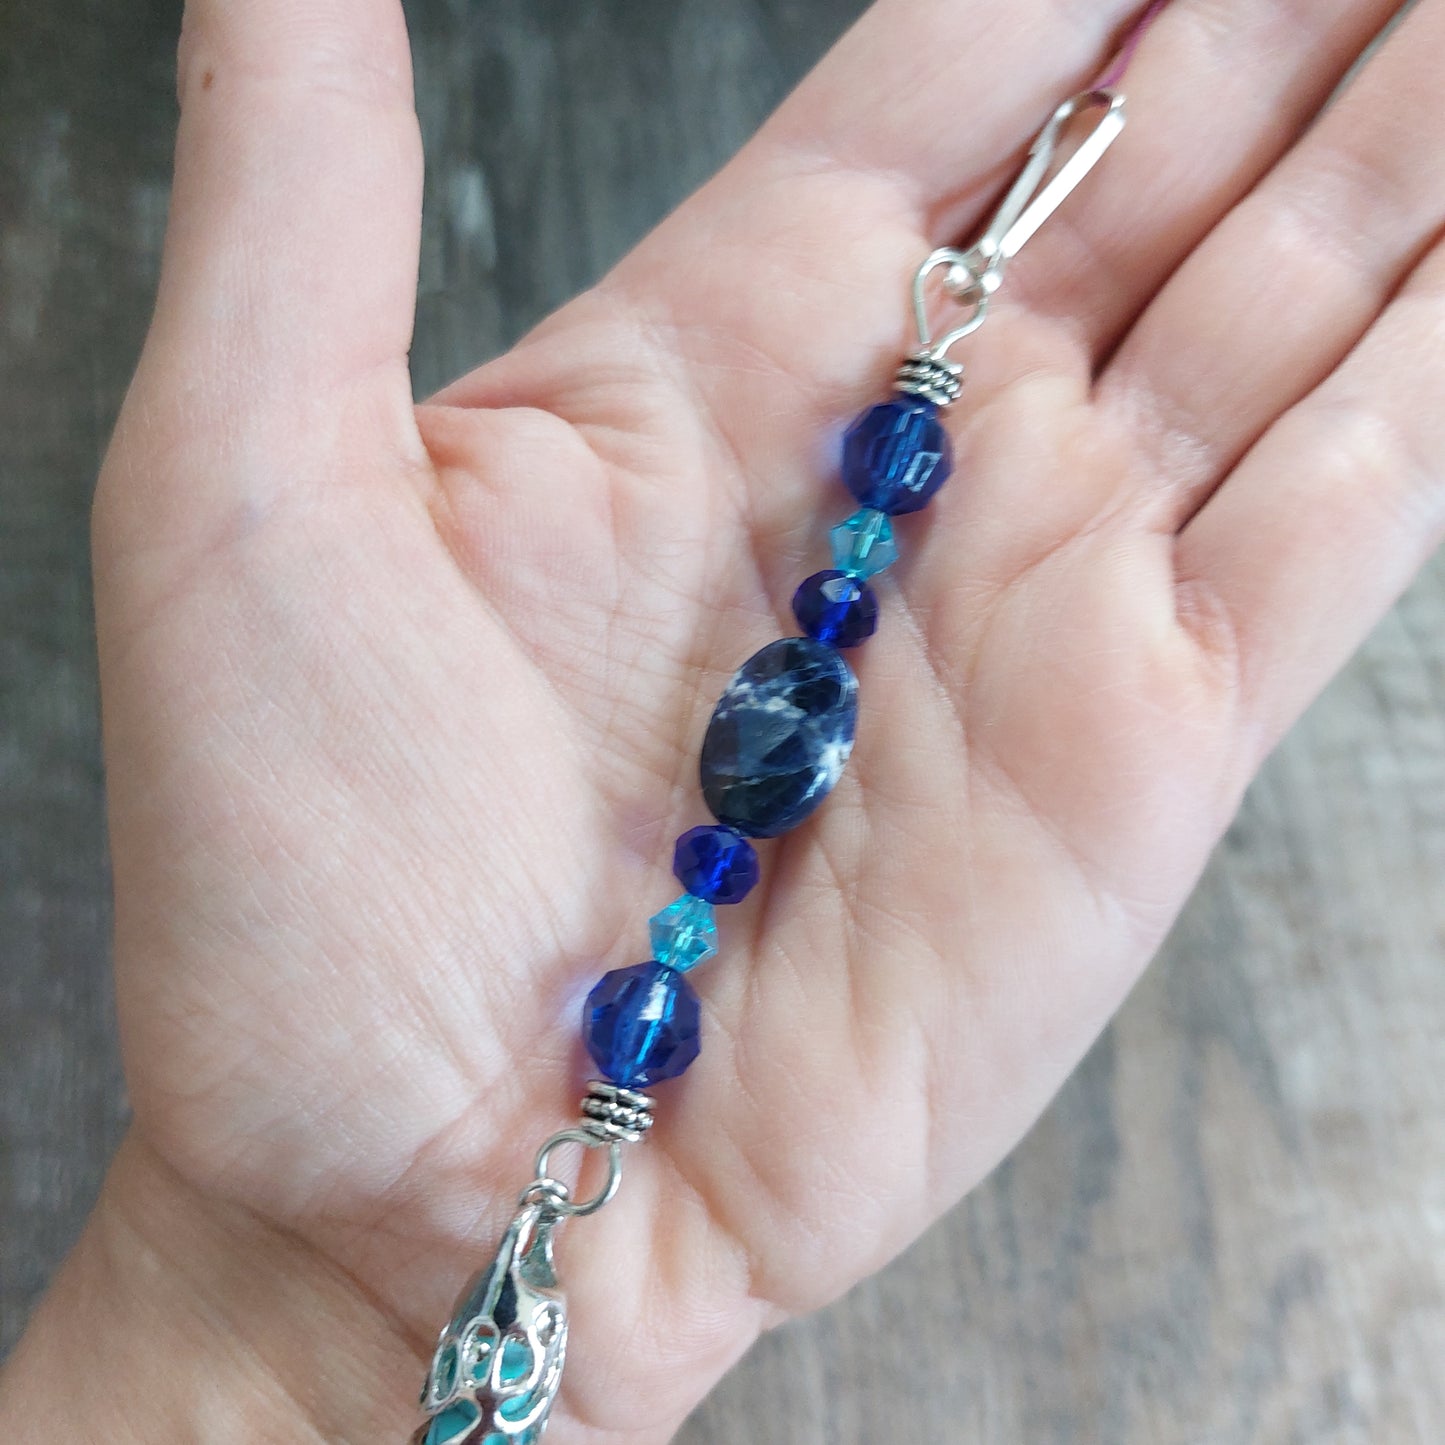 Blue sodalite & howlite flower pot bling | car charm, ornament, light/fan pull chain, window hanging, wall decor- whatever you want it to be!